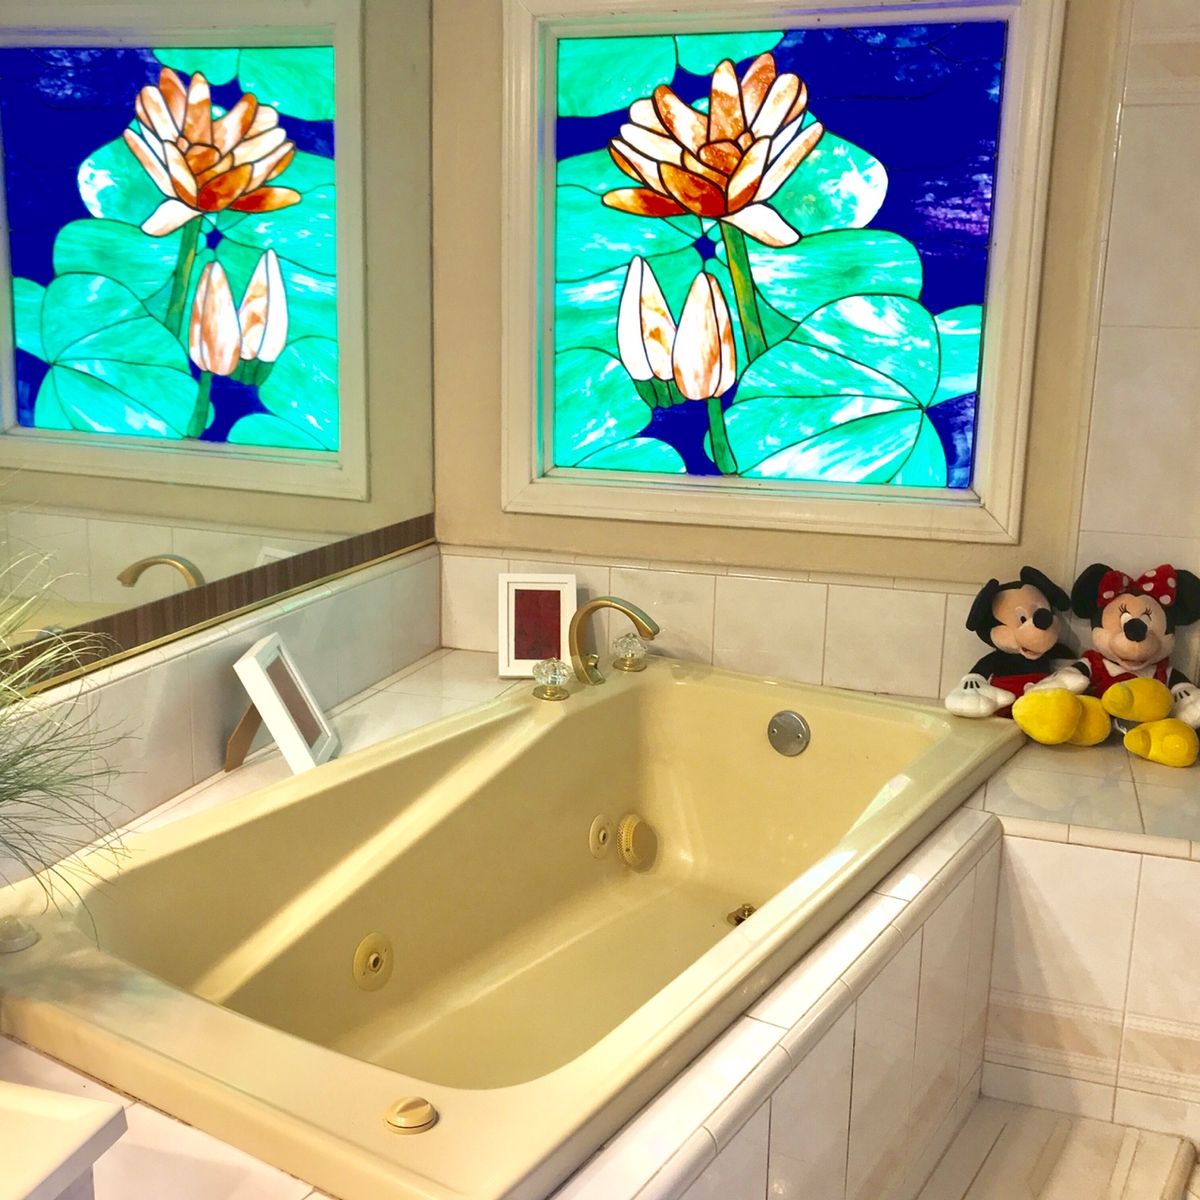 Senior enjoying a relaxing bath in a well-designed bathroom at Happy Home Care For Elderly.